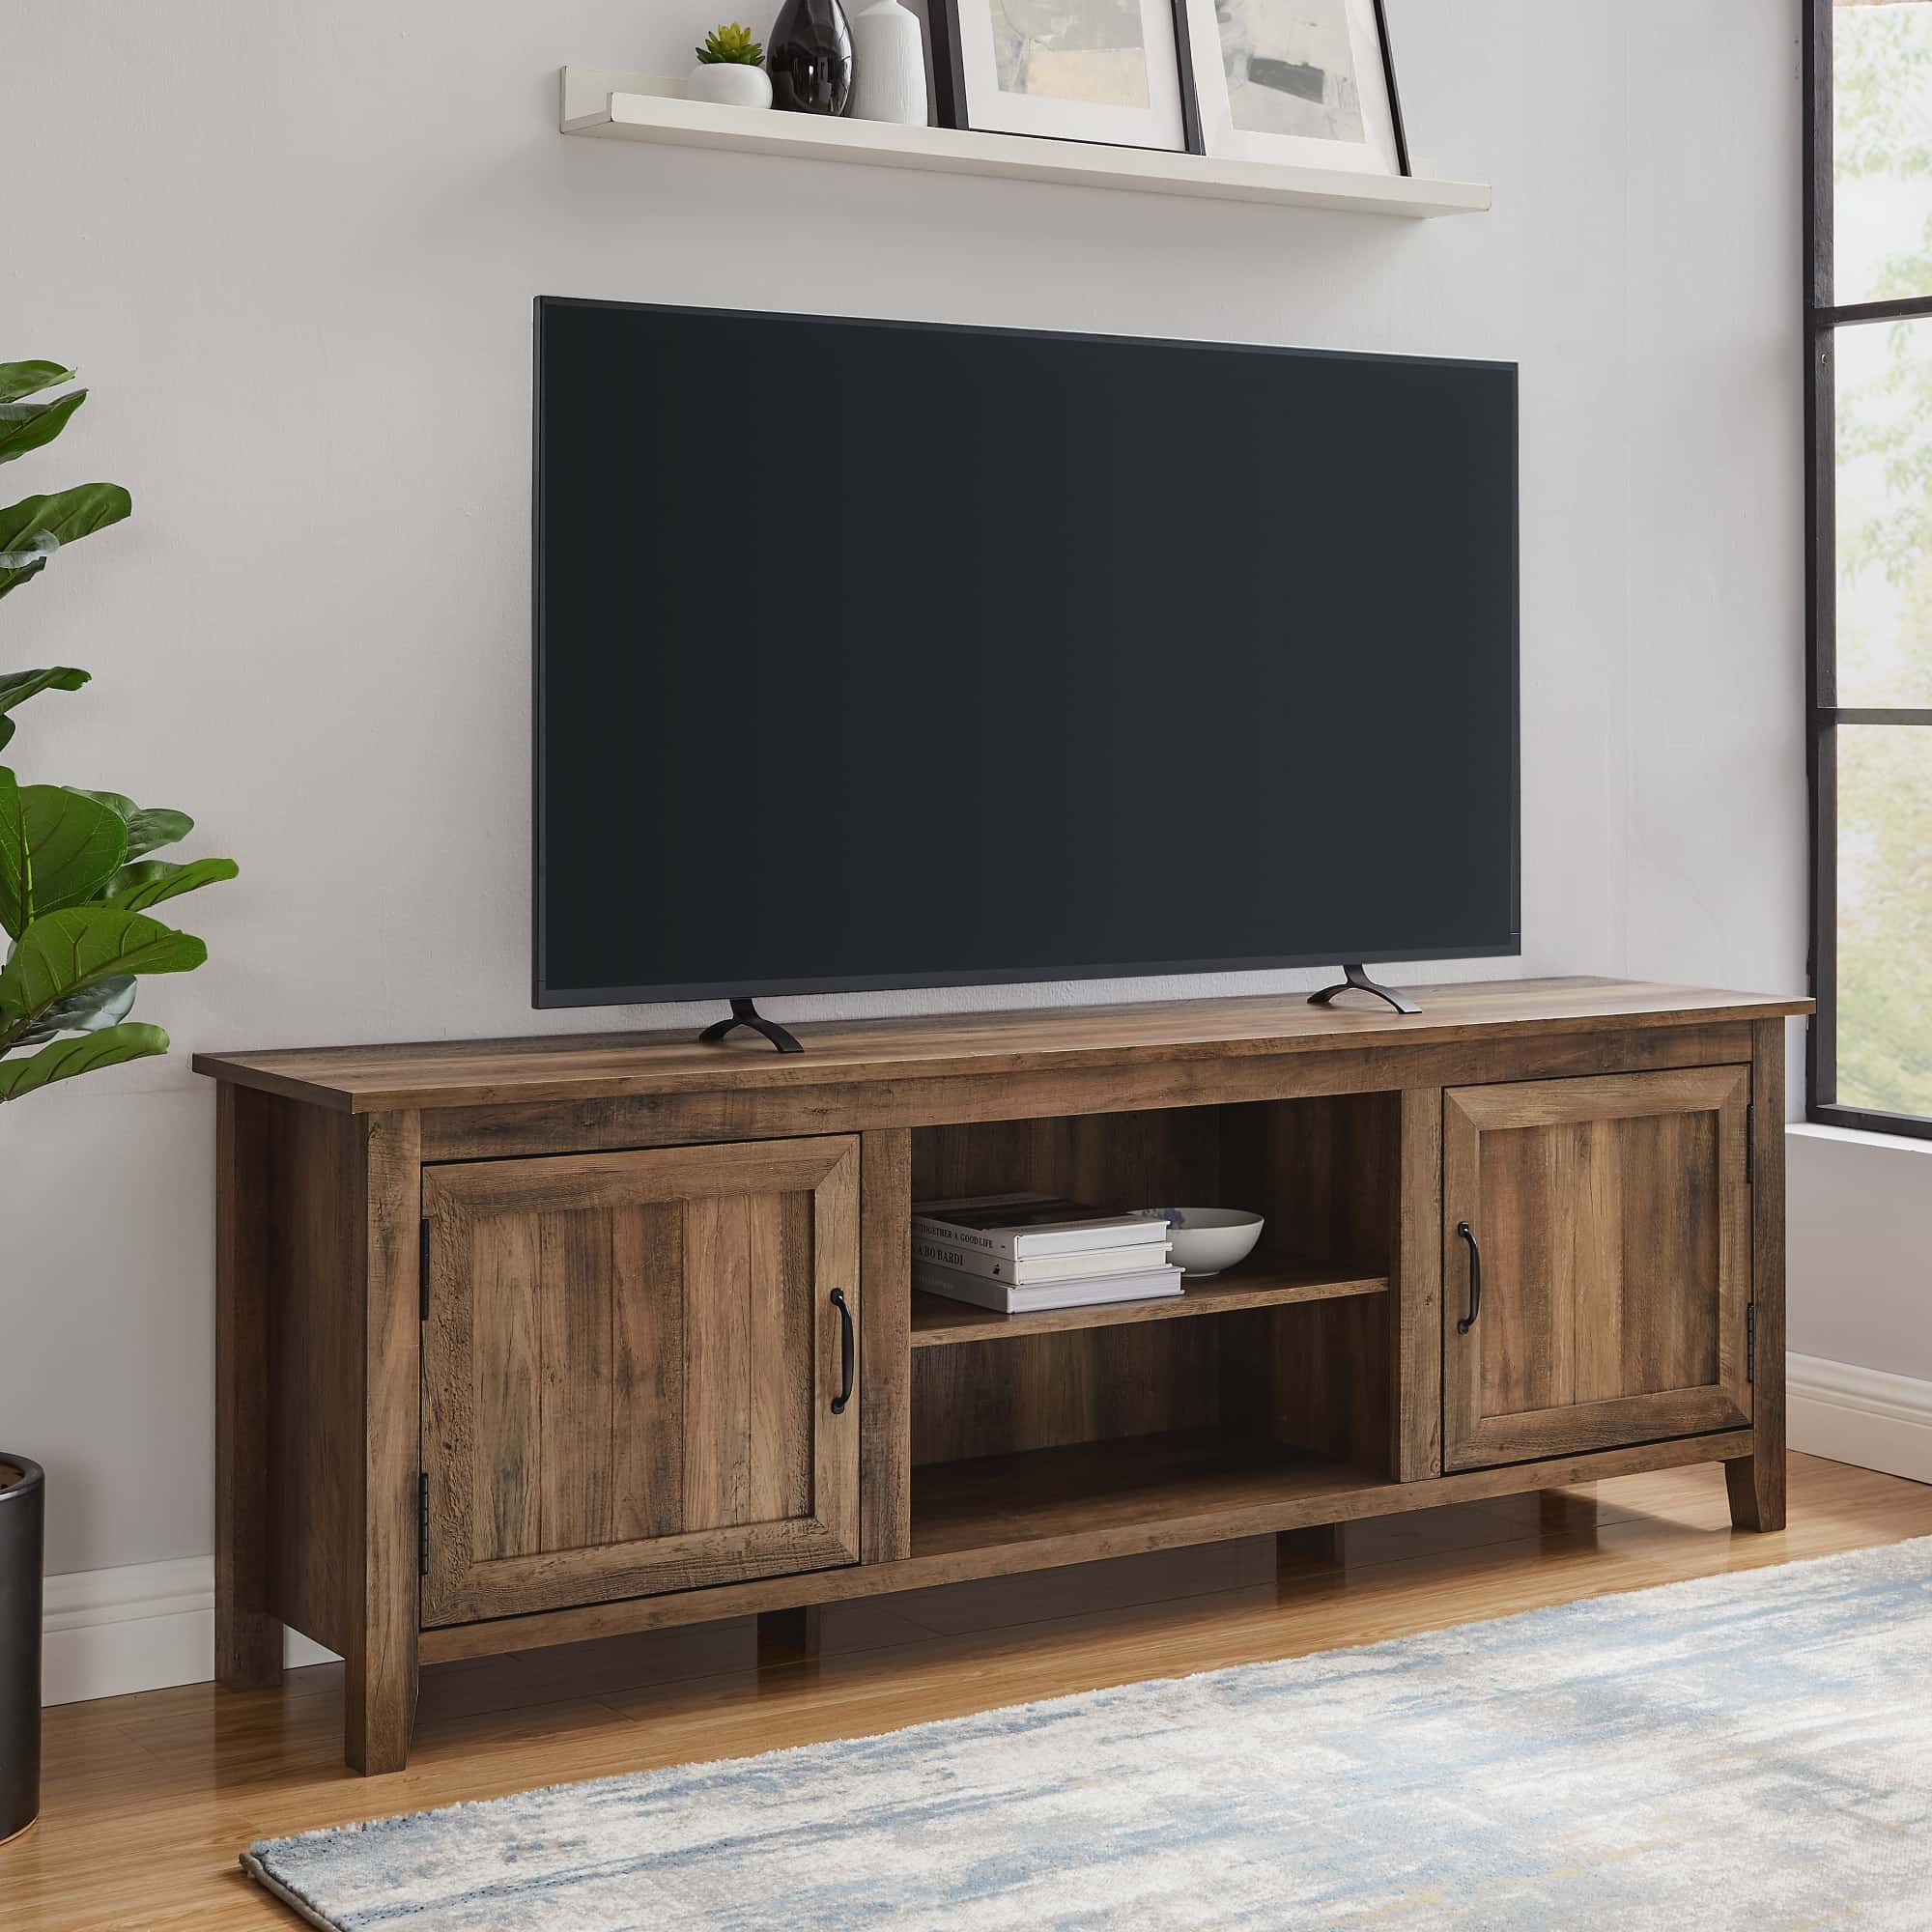 70 Inch Modern Farmhouse Wood Tv Stand – Rustic Oakwalker Edison Intended For Modern Farmhouse Rustic Tv Stands (View 5 of 15)